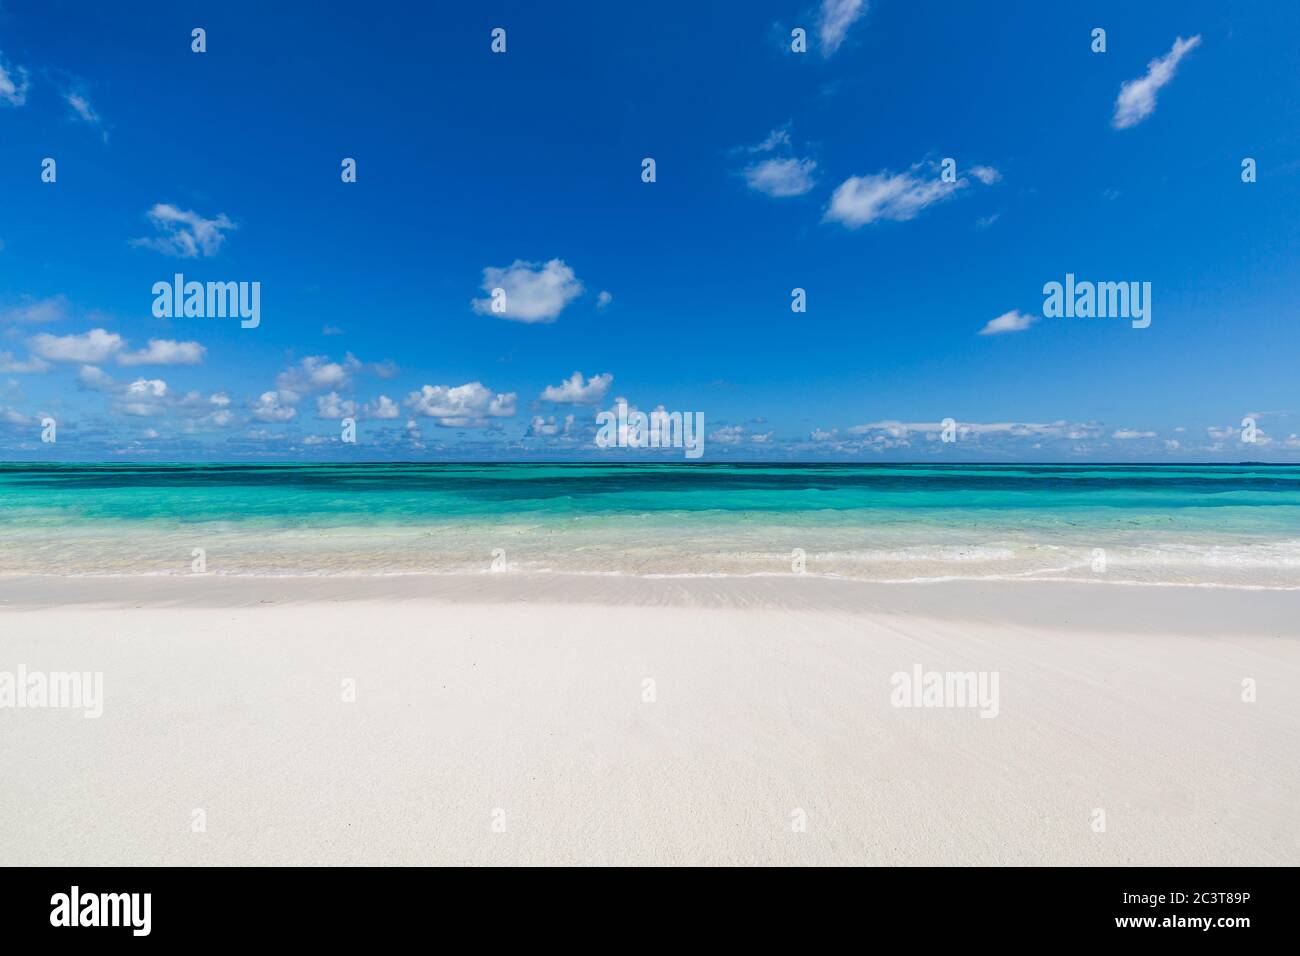 Beach and tropical sea. Tranquil summer seascape and coastline. Zen colors of beach landscape Stock Photo